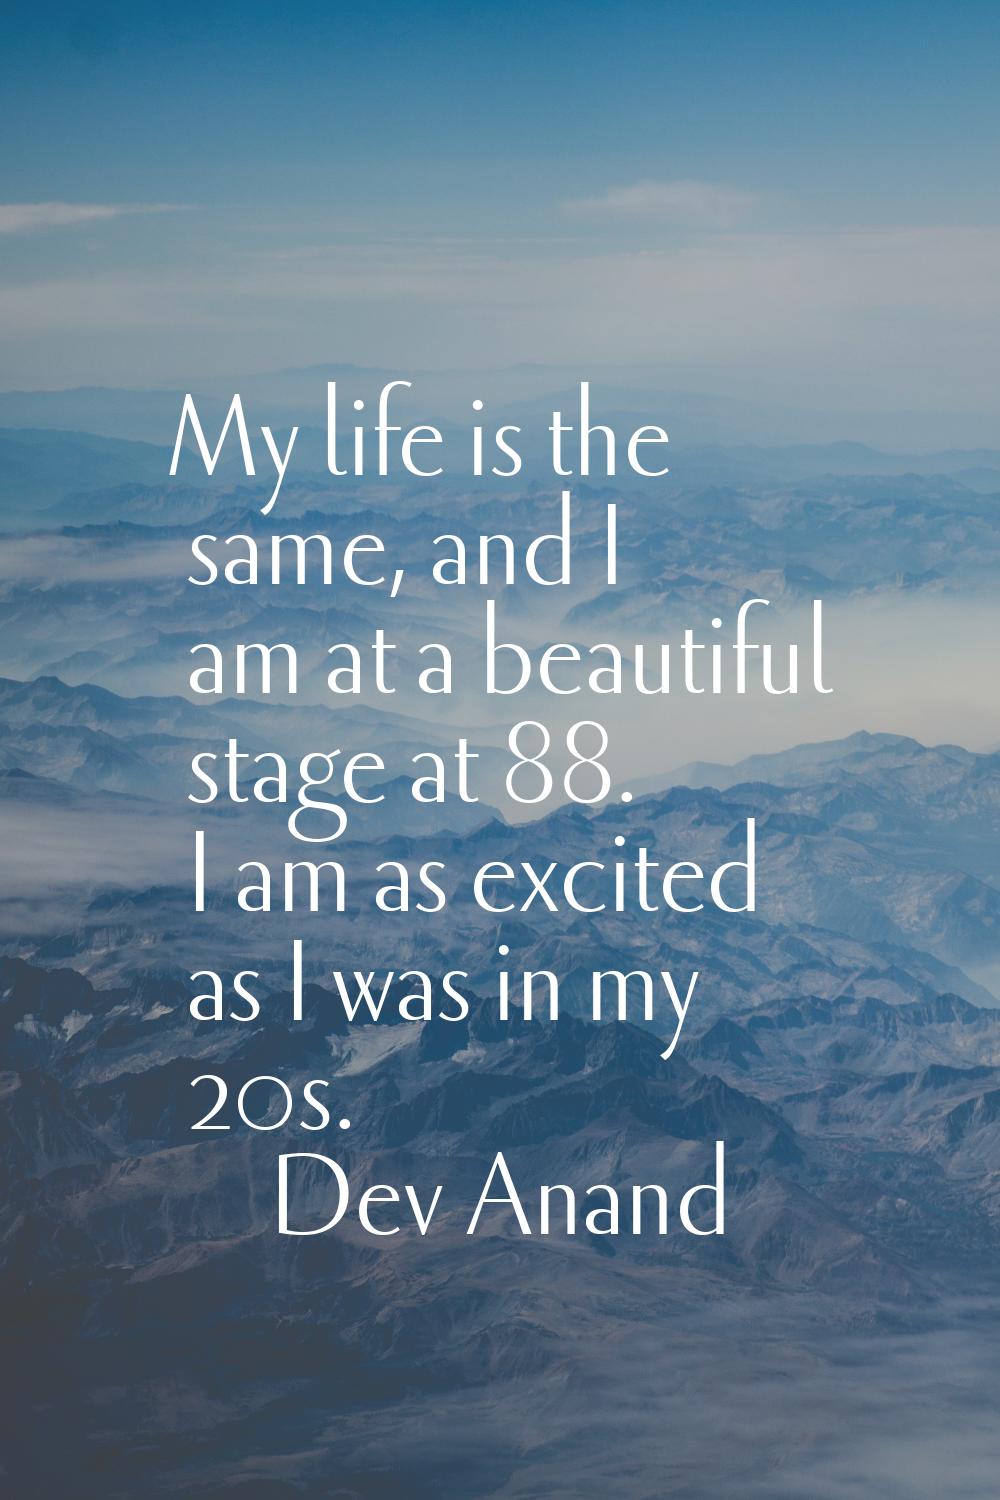 My life is the same, and I am at a beautiful stage at 88. I am as excited as I was in my 20s.